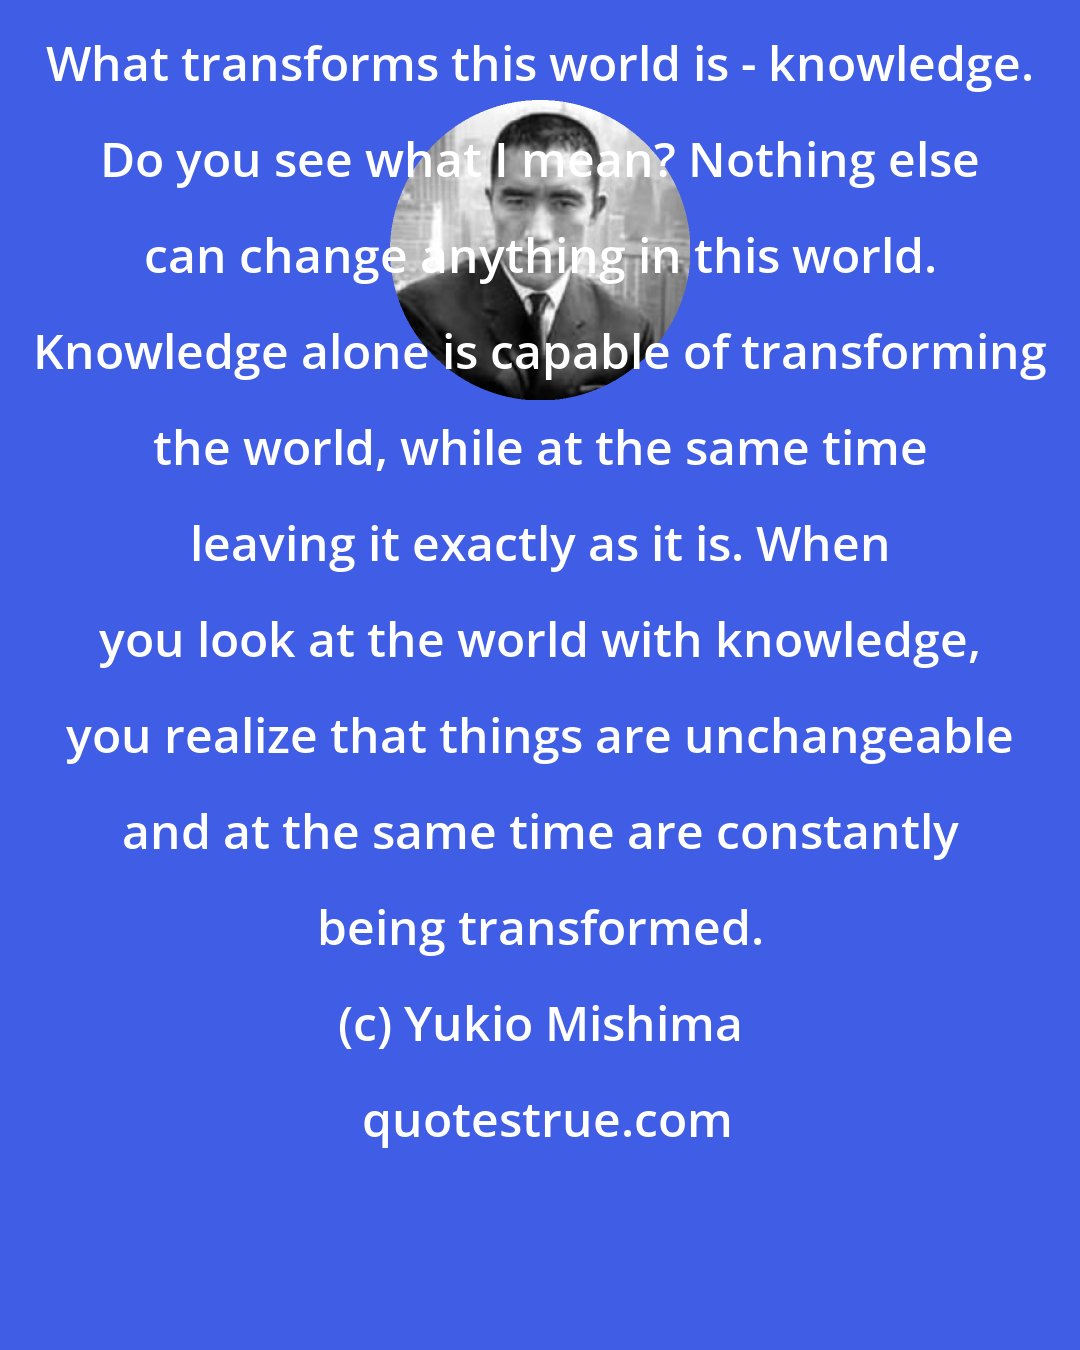 Yukio Mishima: What transforms this world is - knowledge. Do you see what I mean? Nothing else can change anything in this world. Knowledge alone is capable of transforming the world, while at the same time leaving it exactly as it is. When you look at the world with knowledge, you realize that things are unchangeable and at the same time are constantly being transformed.